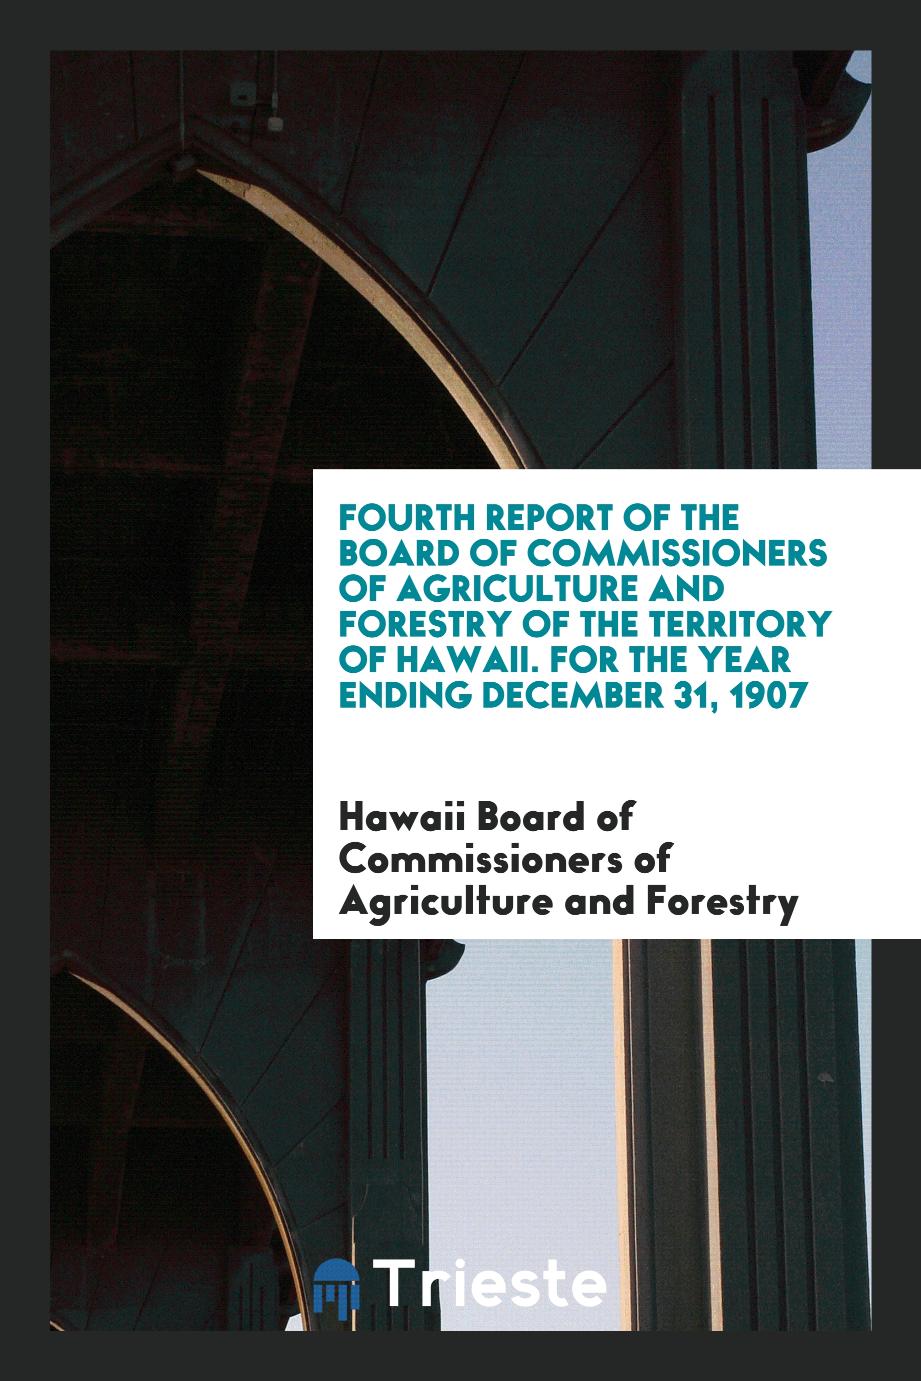 Fourth Report of the Board of Commissioners of Agriculture and Forestry of the Territory of Hawaii. For the Year Ending December 31, 1907